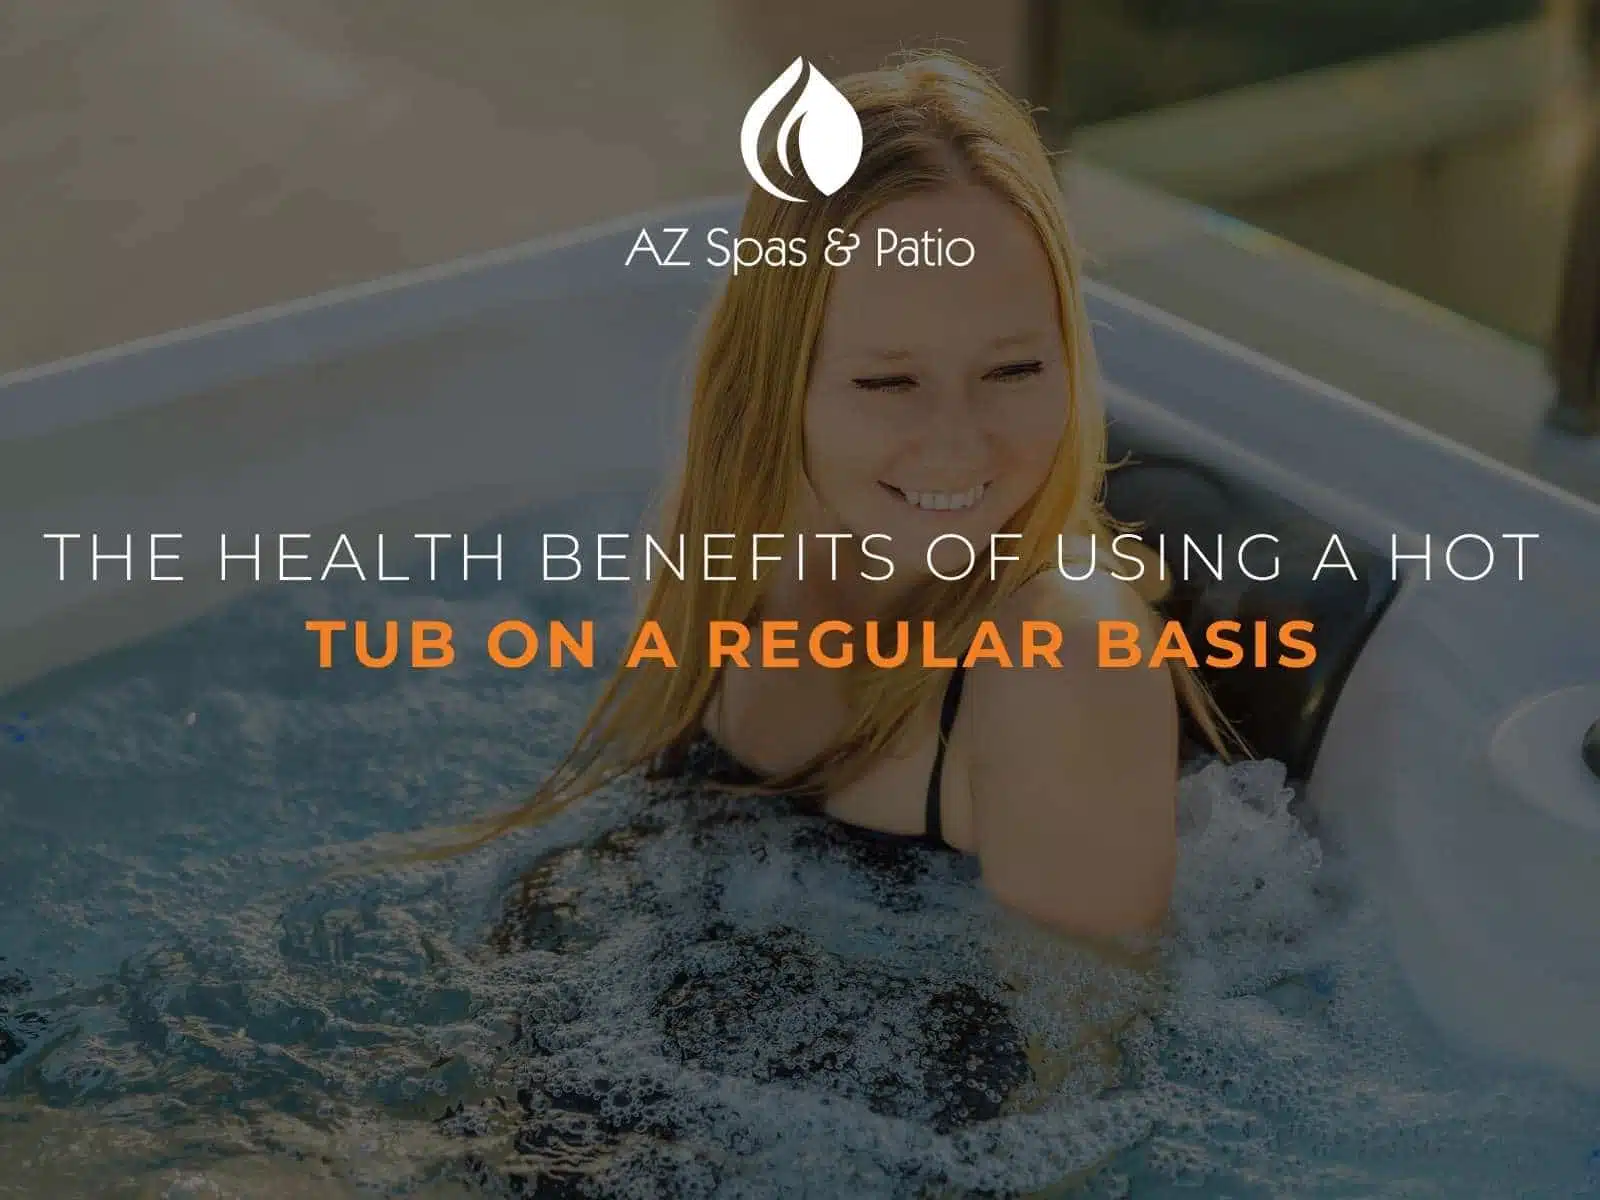 THE HEALTH BENEFITS OF USING A HOT TUB ON A REGULAR BASIS